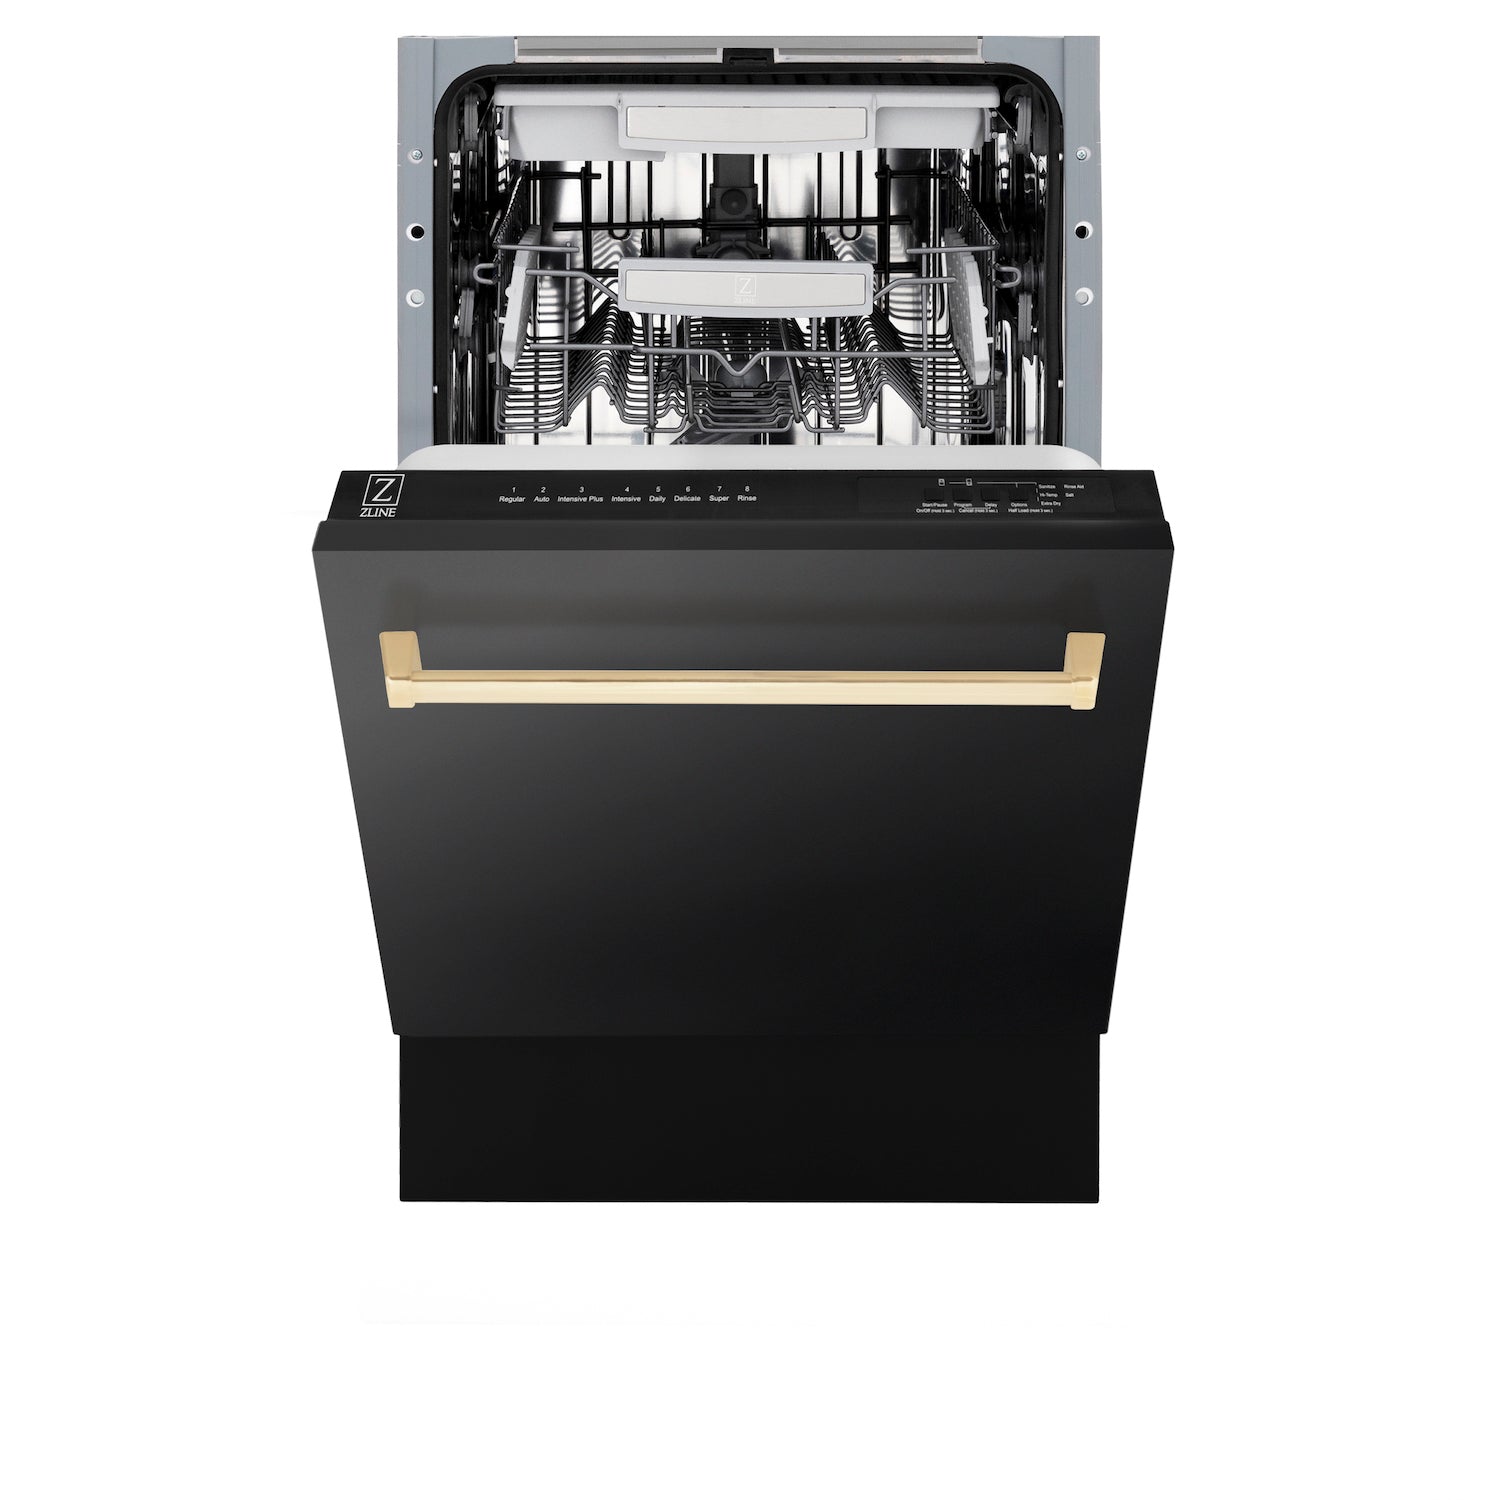 ZLINE Autograph Edition 18 in. Tallac Series 3rd Rack Top Control Built-In Dishwasher in Black Stainless Steel with Polished Gold Handle, 51dBa (DWVZ-BS-18-G) front, half open.